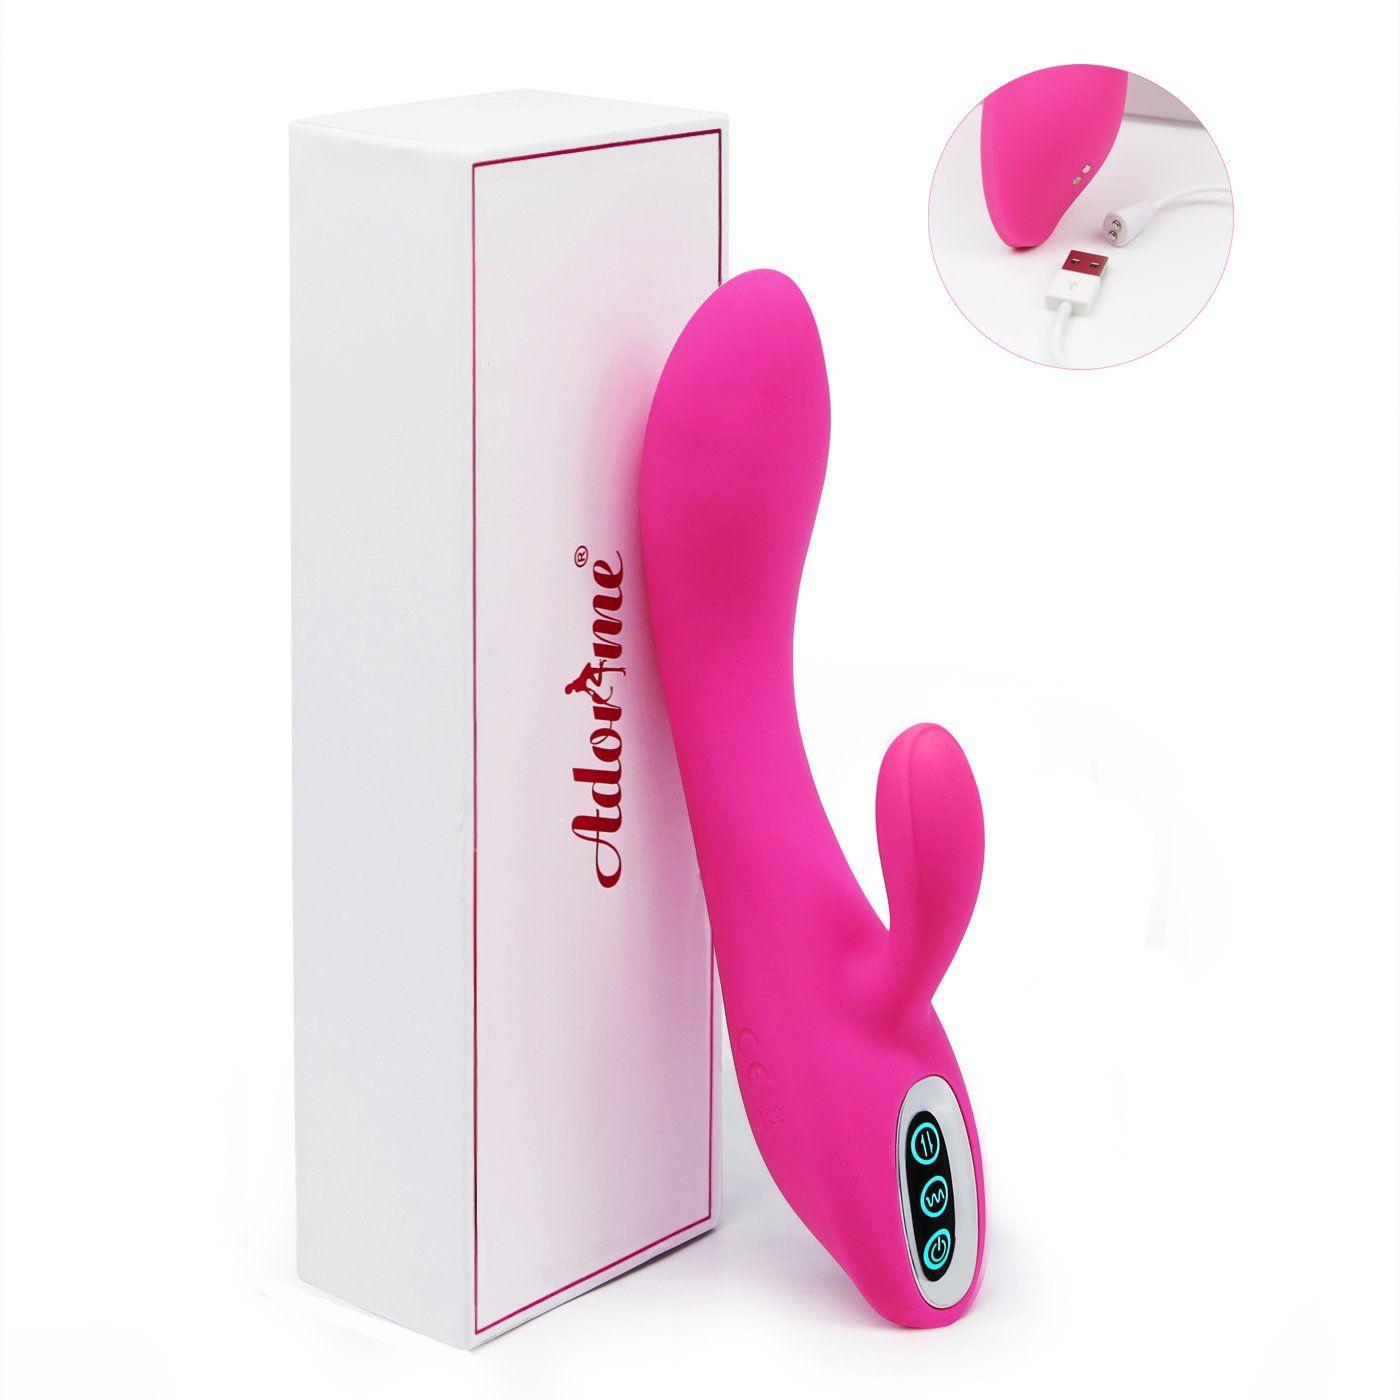 Spike reccomend Made me come with vibrator